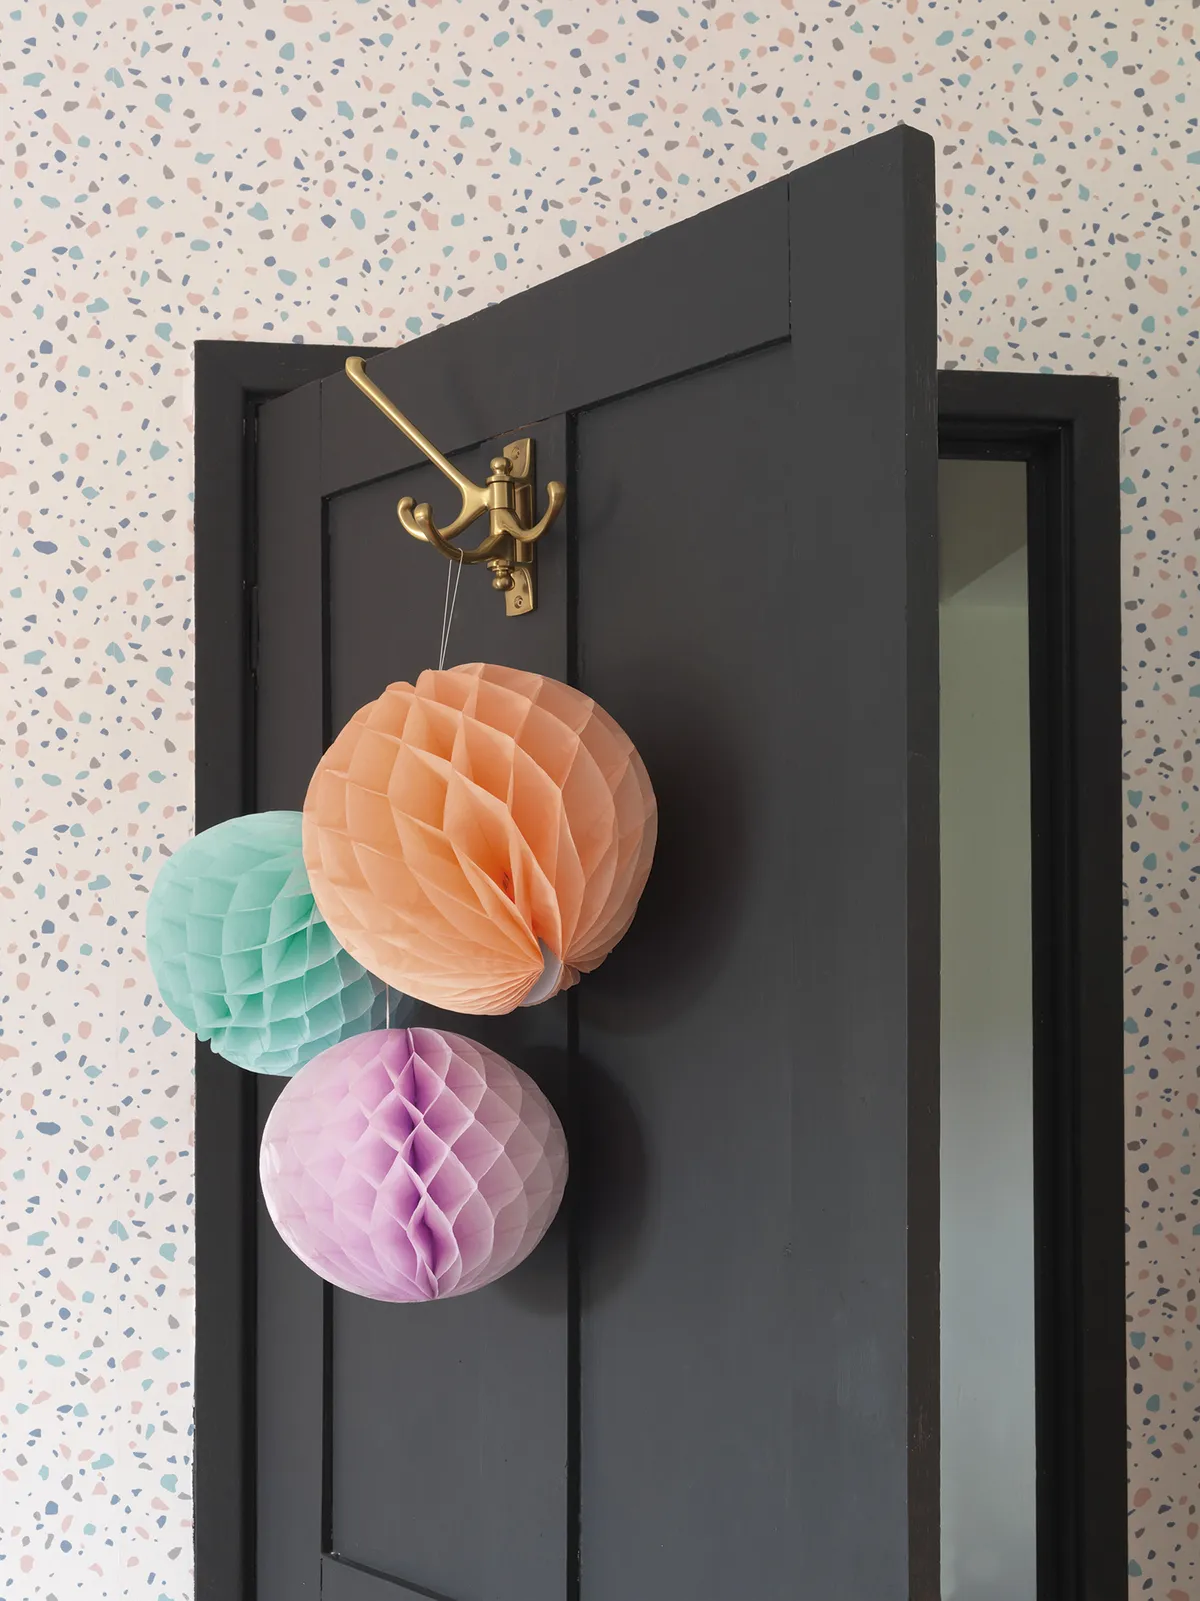 Raya already had the honeycomb paper decorations but realised they perfectly matched the colours in the B&Q terrazzo wallpaper. ‘I just thought, why not keep them up?’ she says